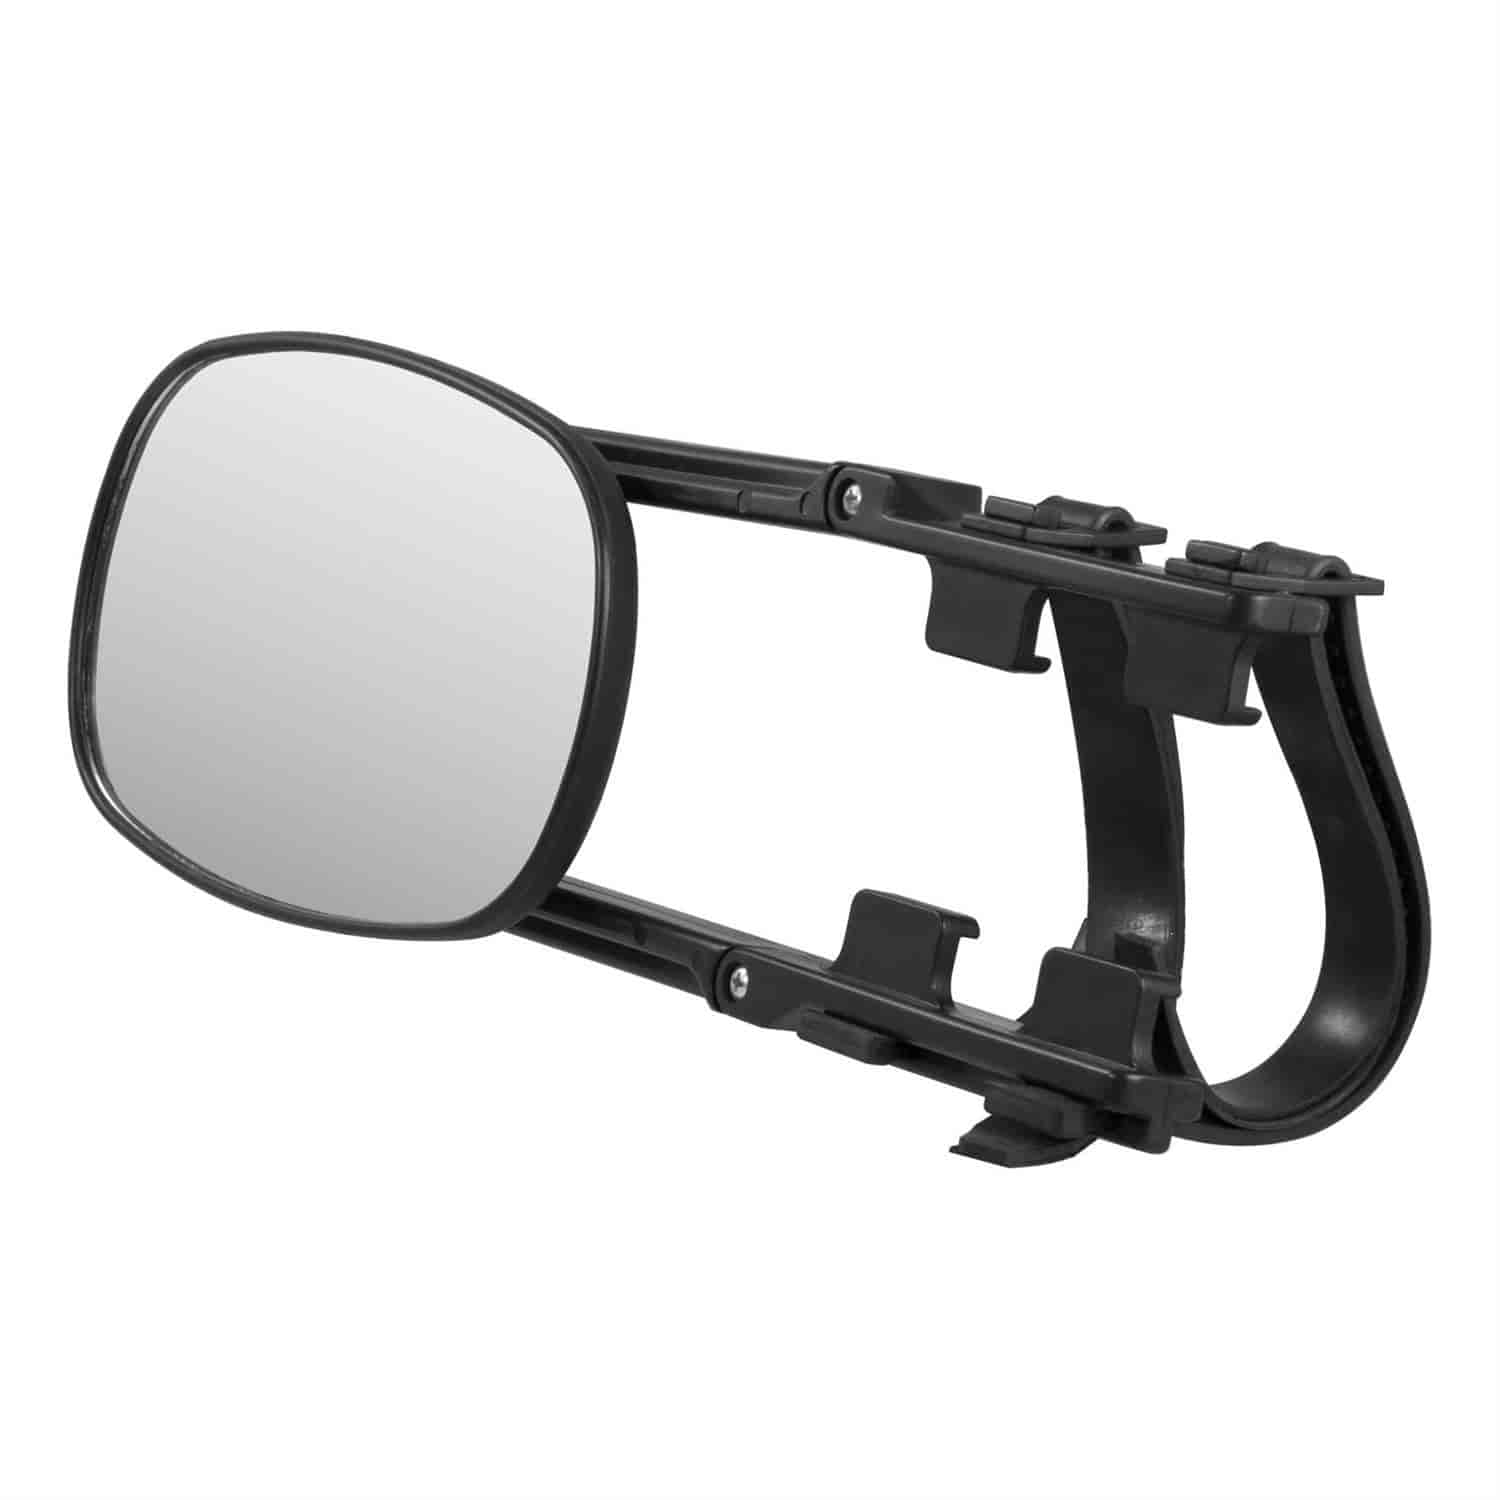 Tow Mirror Fits Mirrors 4" To 11" Tall